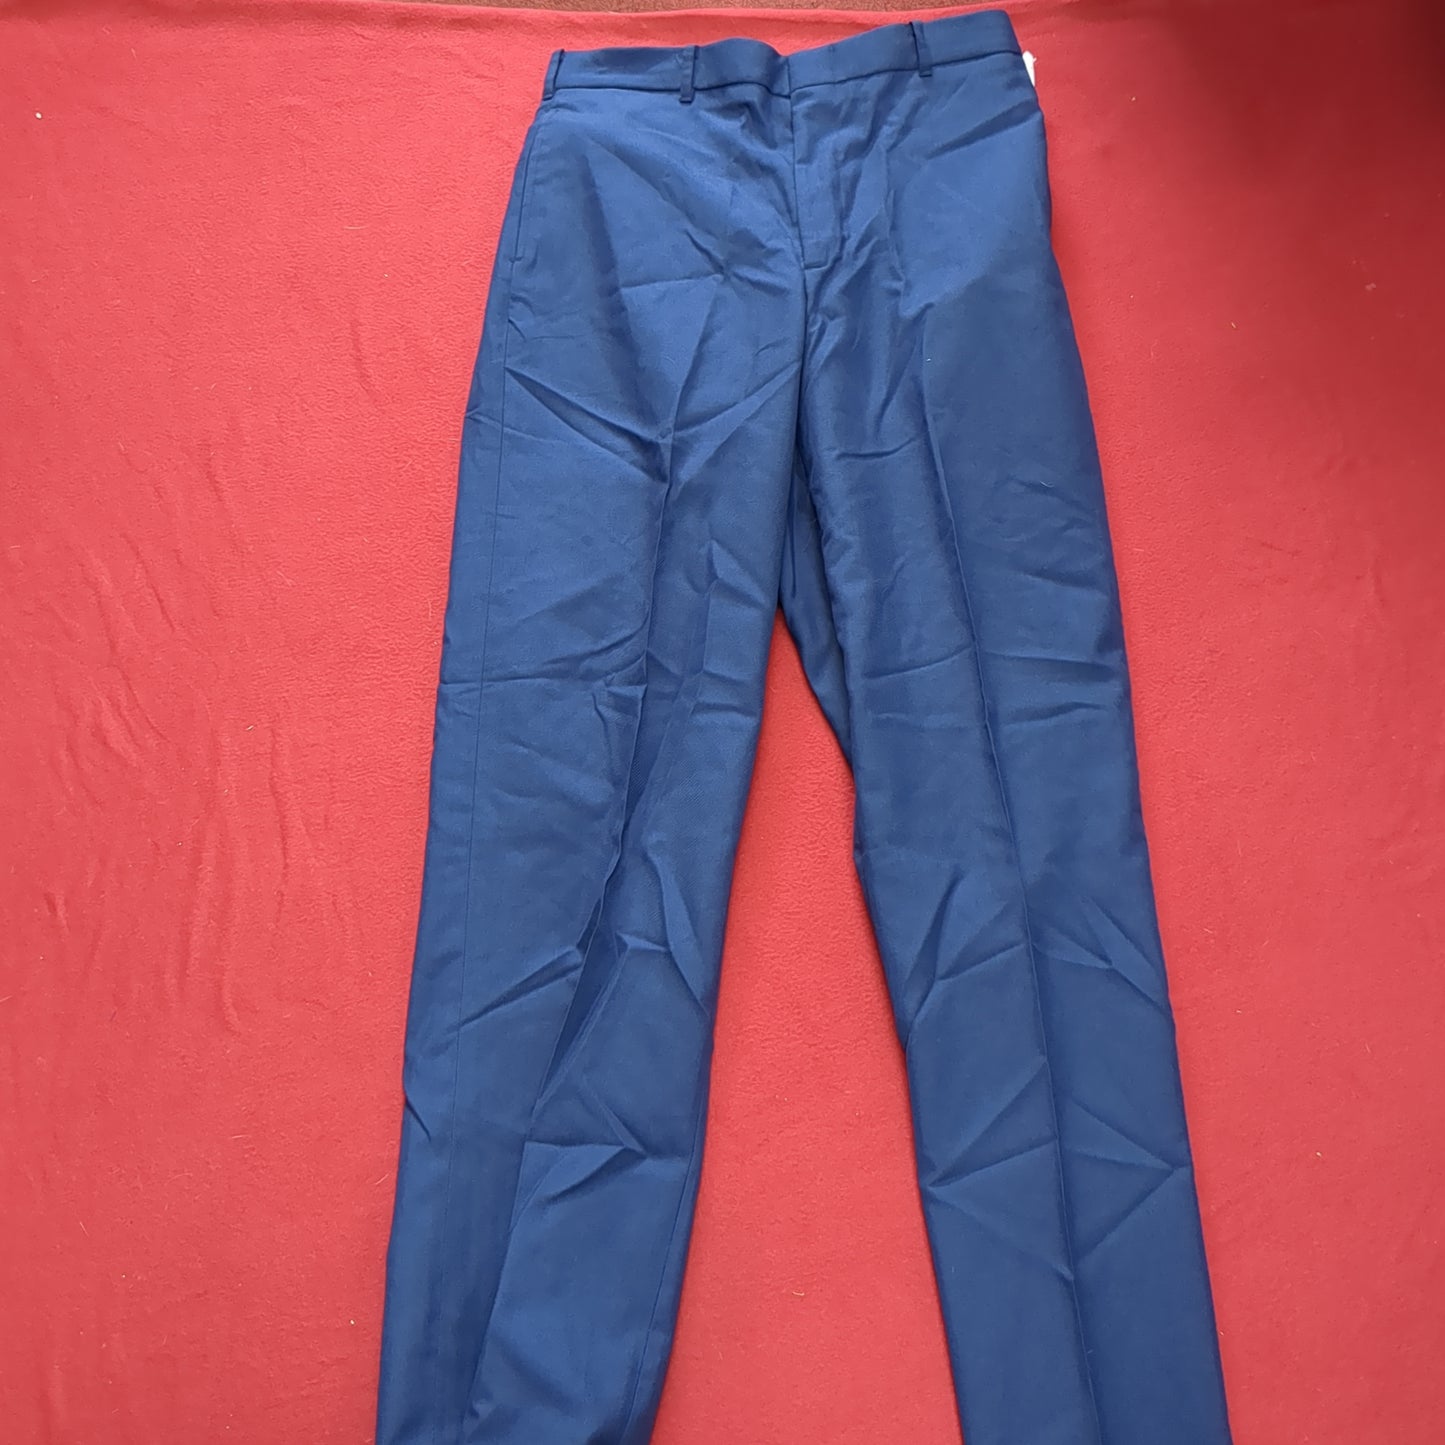 US Army ASU 32 Regular Enlisted Unhemmed Unstriped Pants Trouser Dress Blue (31a189)